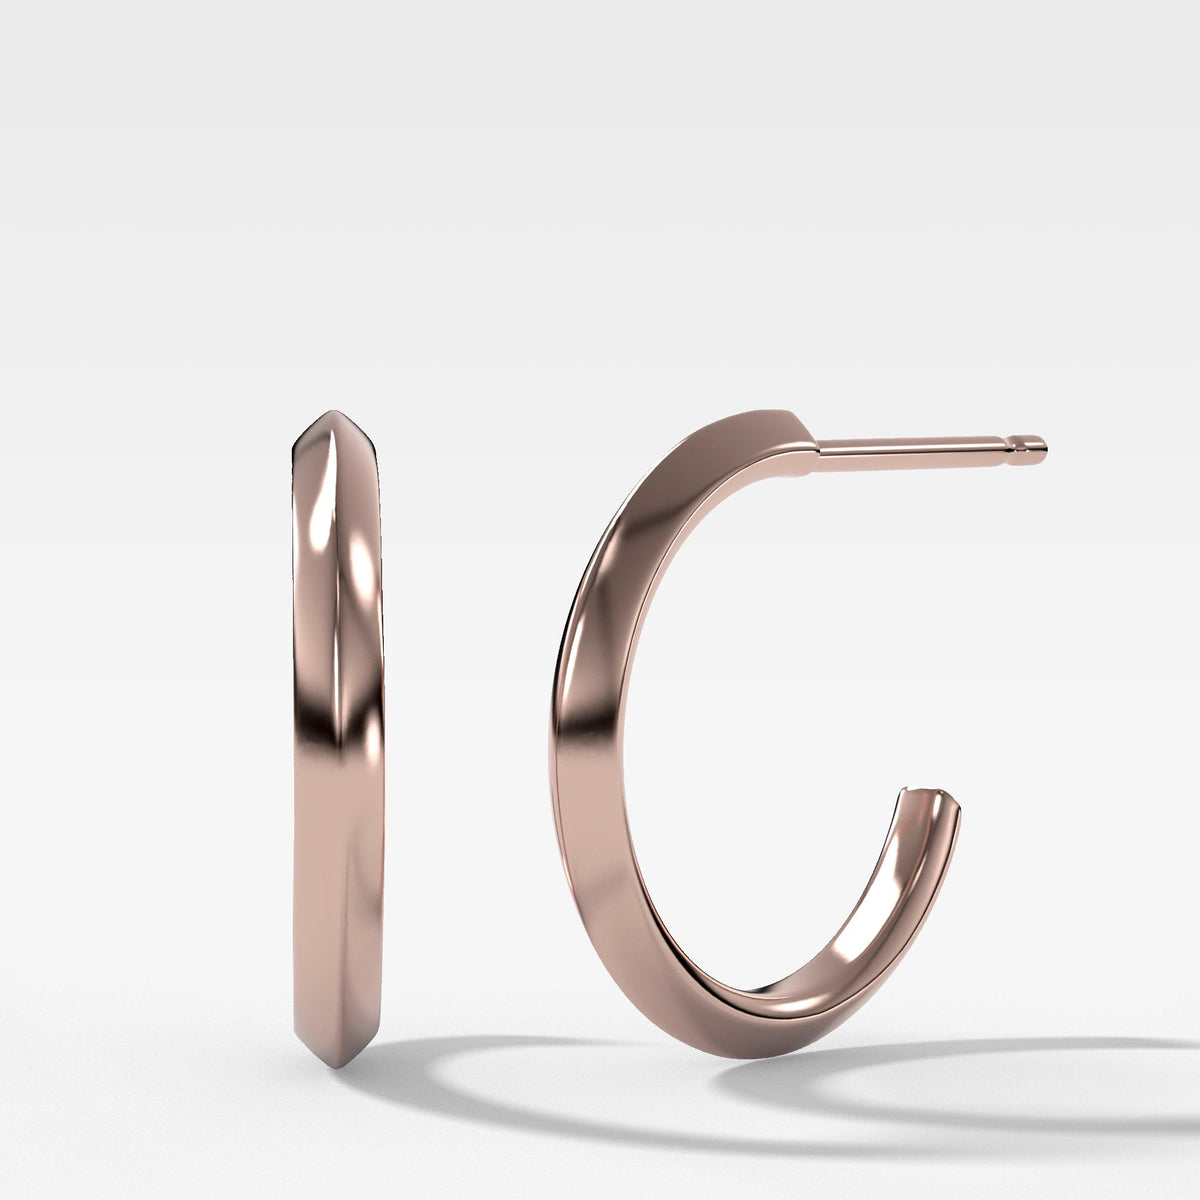 Butter Knife Edge Earrings in Rose Gold by Good Stone